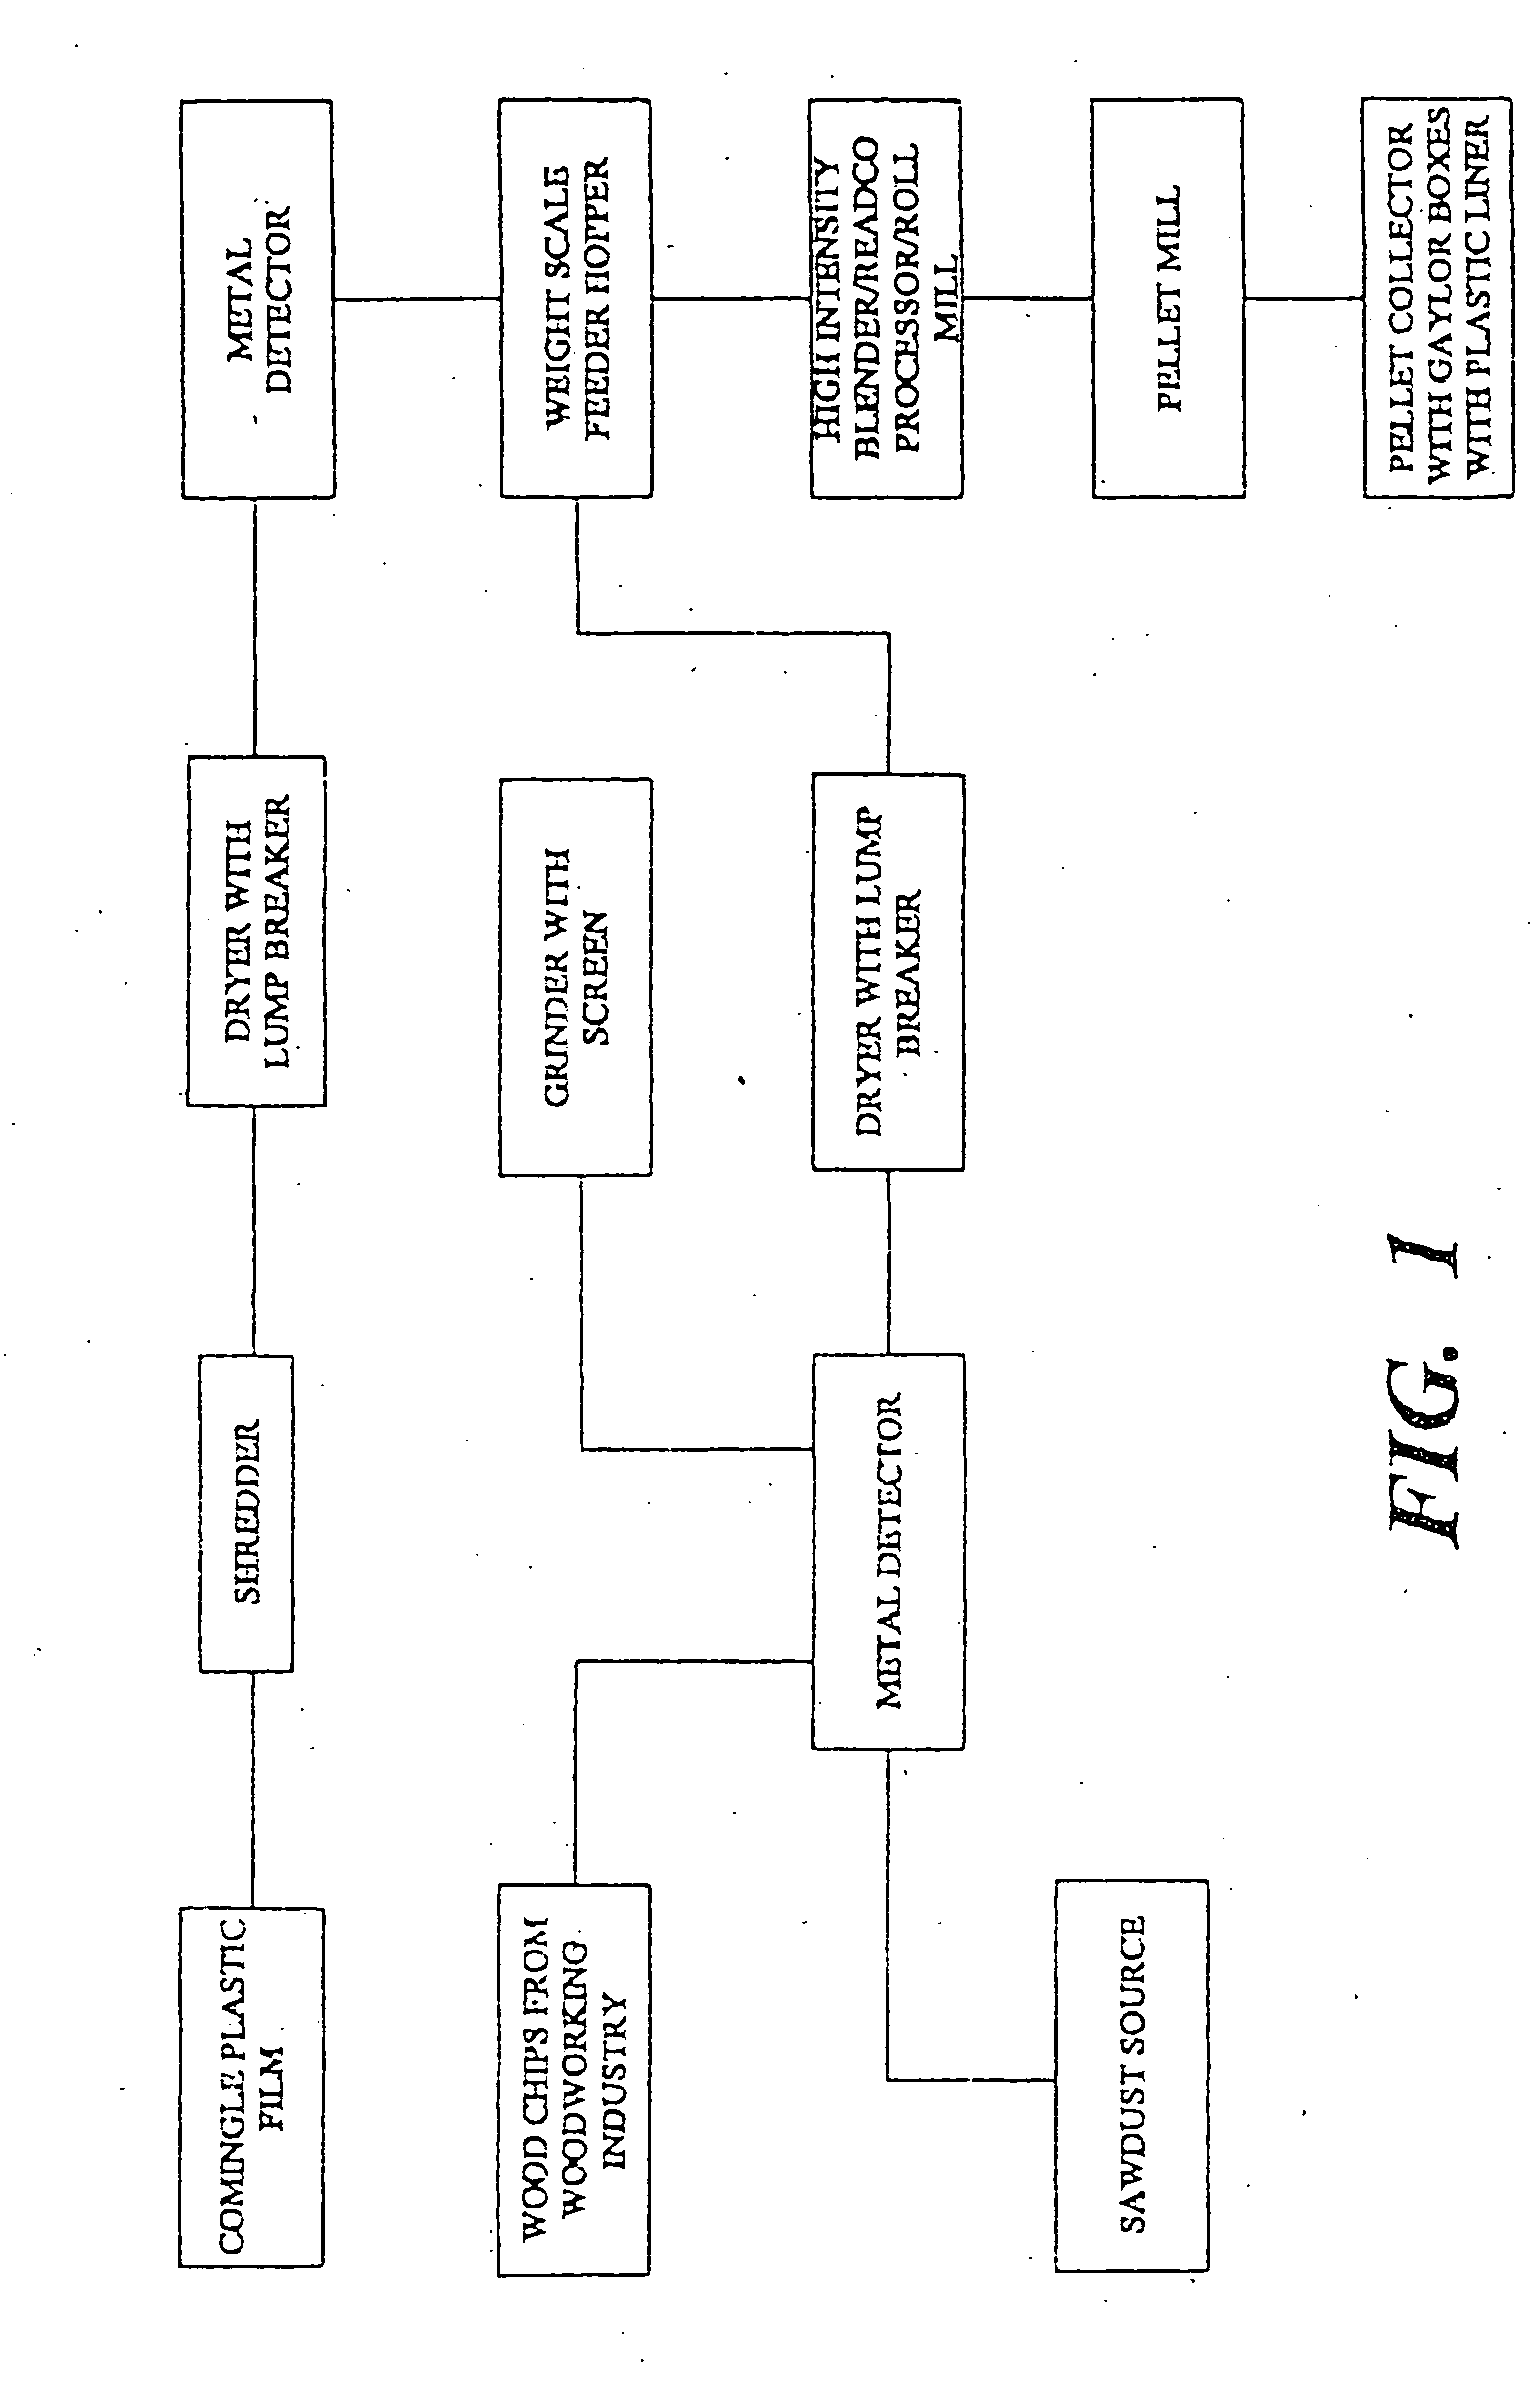 Process for making modified cellulosic filler from recycled plastic waste and forming wood substitute articles